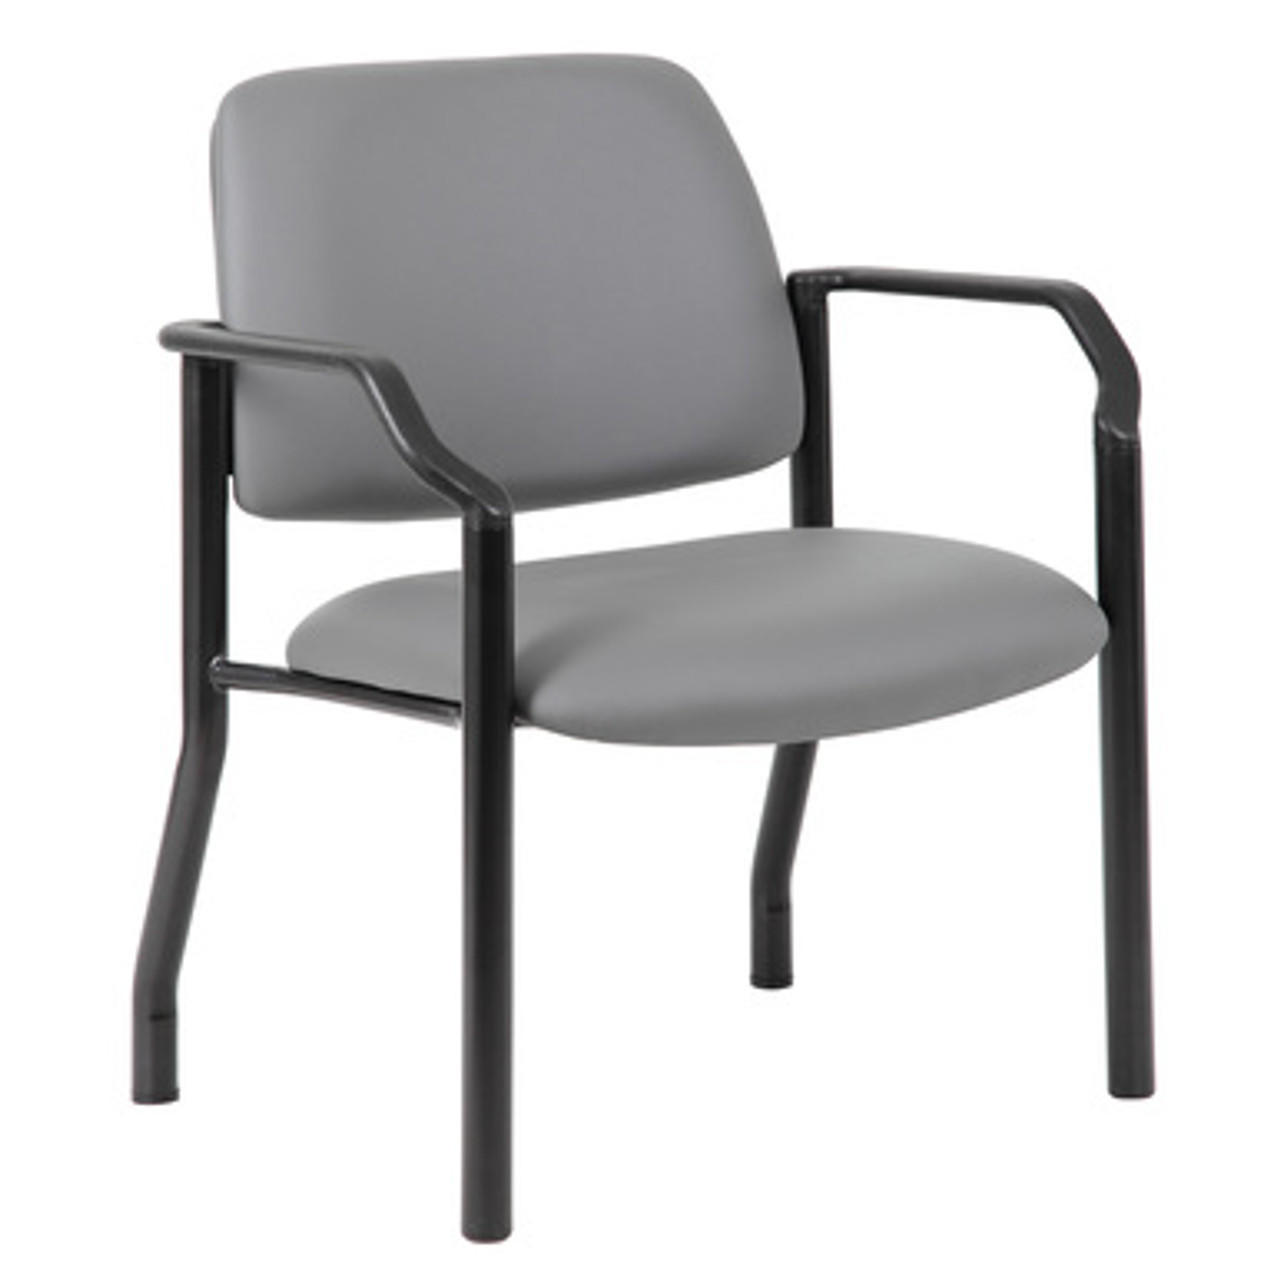 500 lbs. Capacity Antimicrobial Black Vinyl Guest Chair with Arms